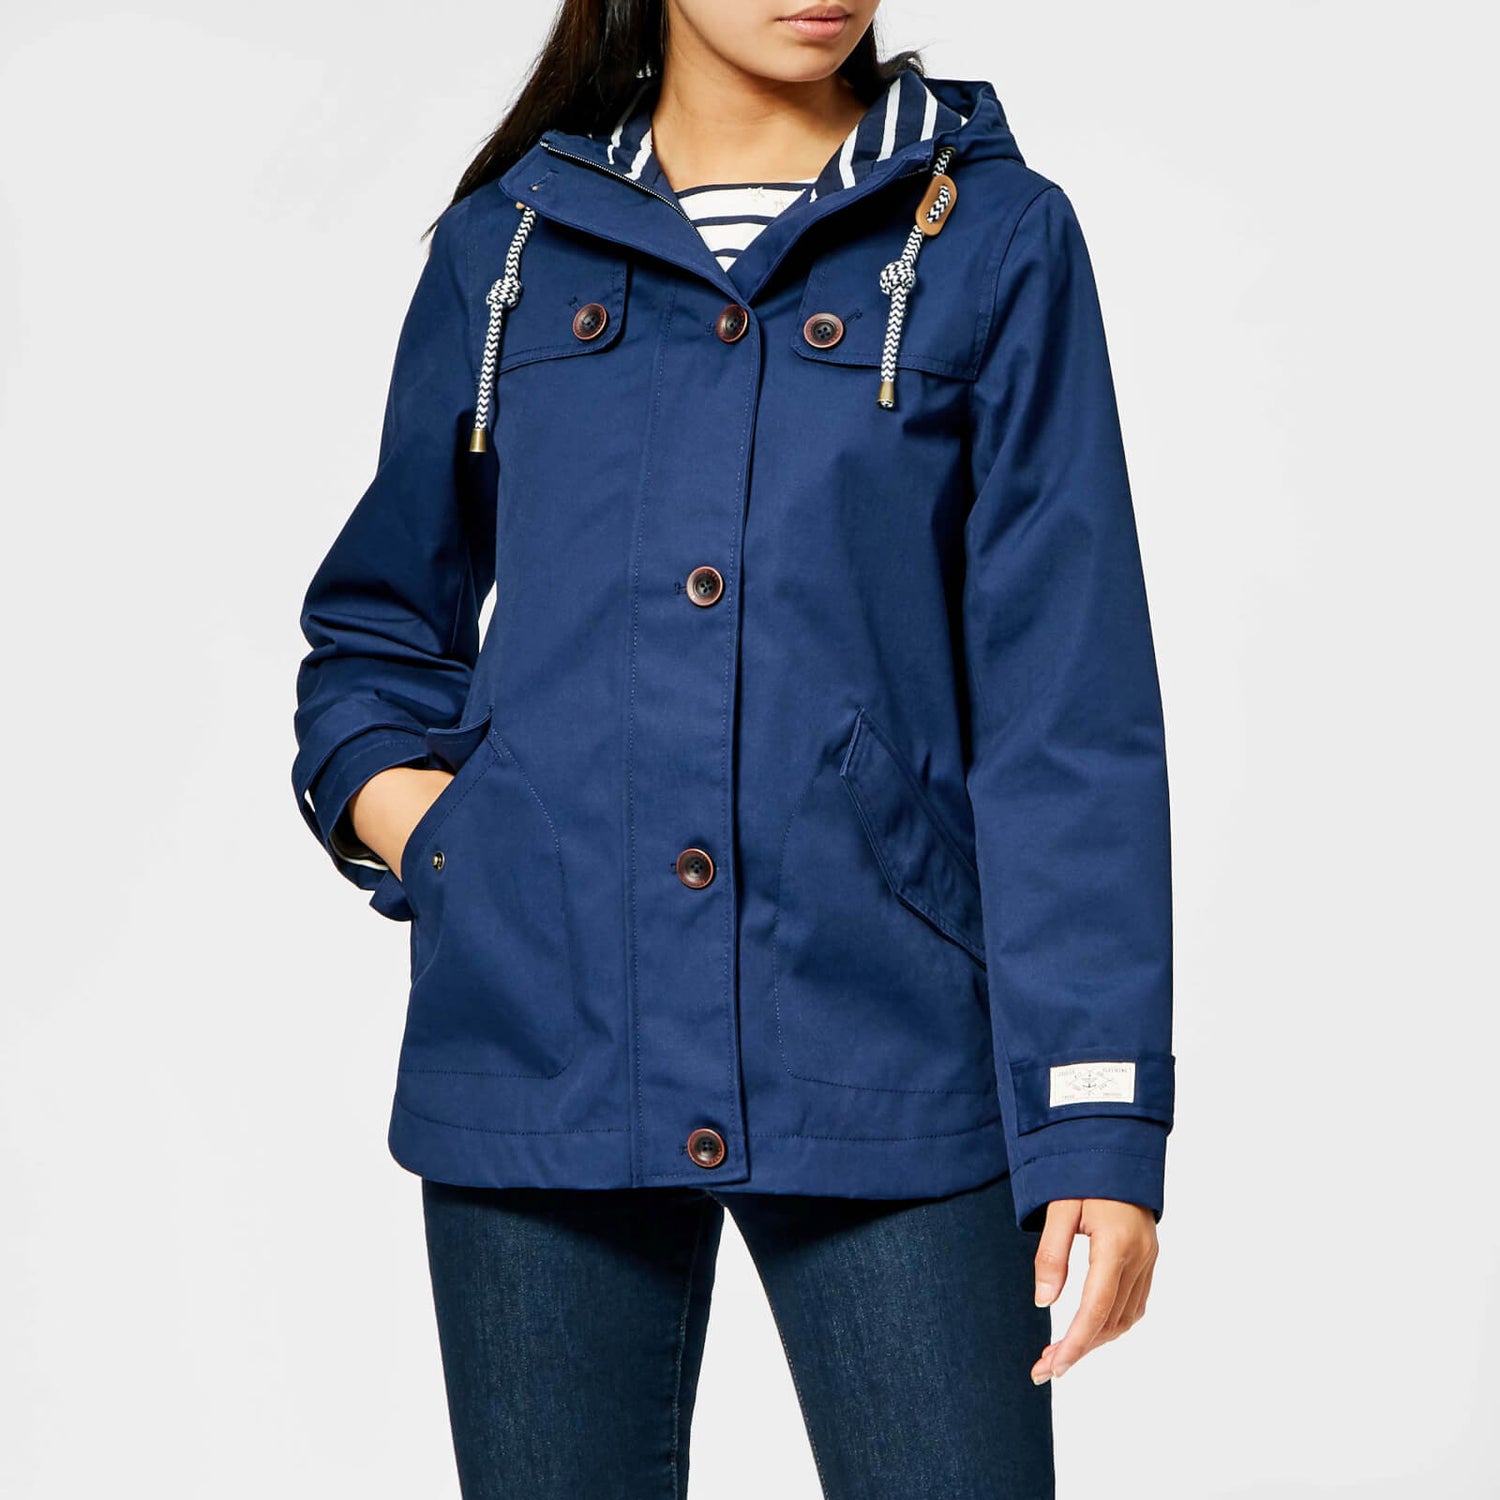 Joules Coast Womens Jacket Waterproof French Navy All Sizes 